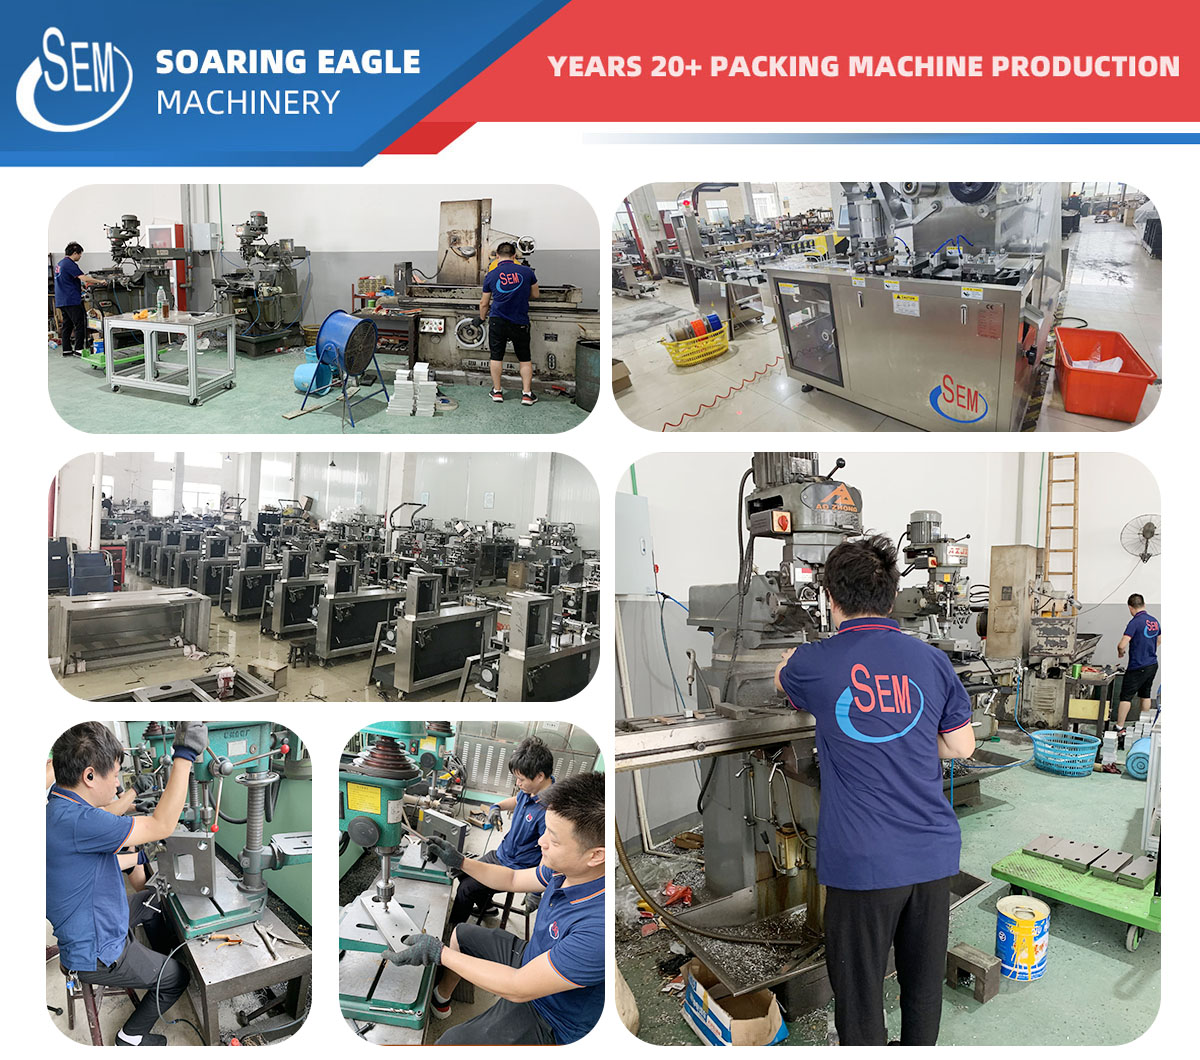 DPP80 automatic pharmacy blister packing machines tablet capsule packaging machinery